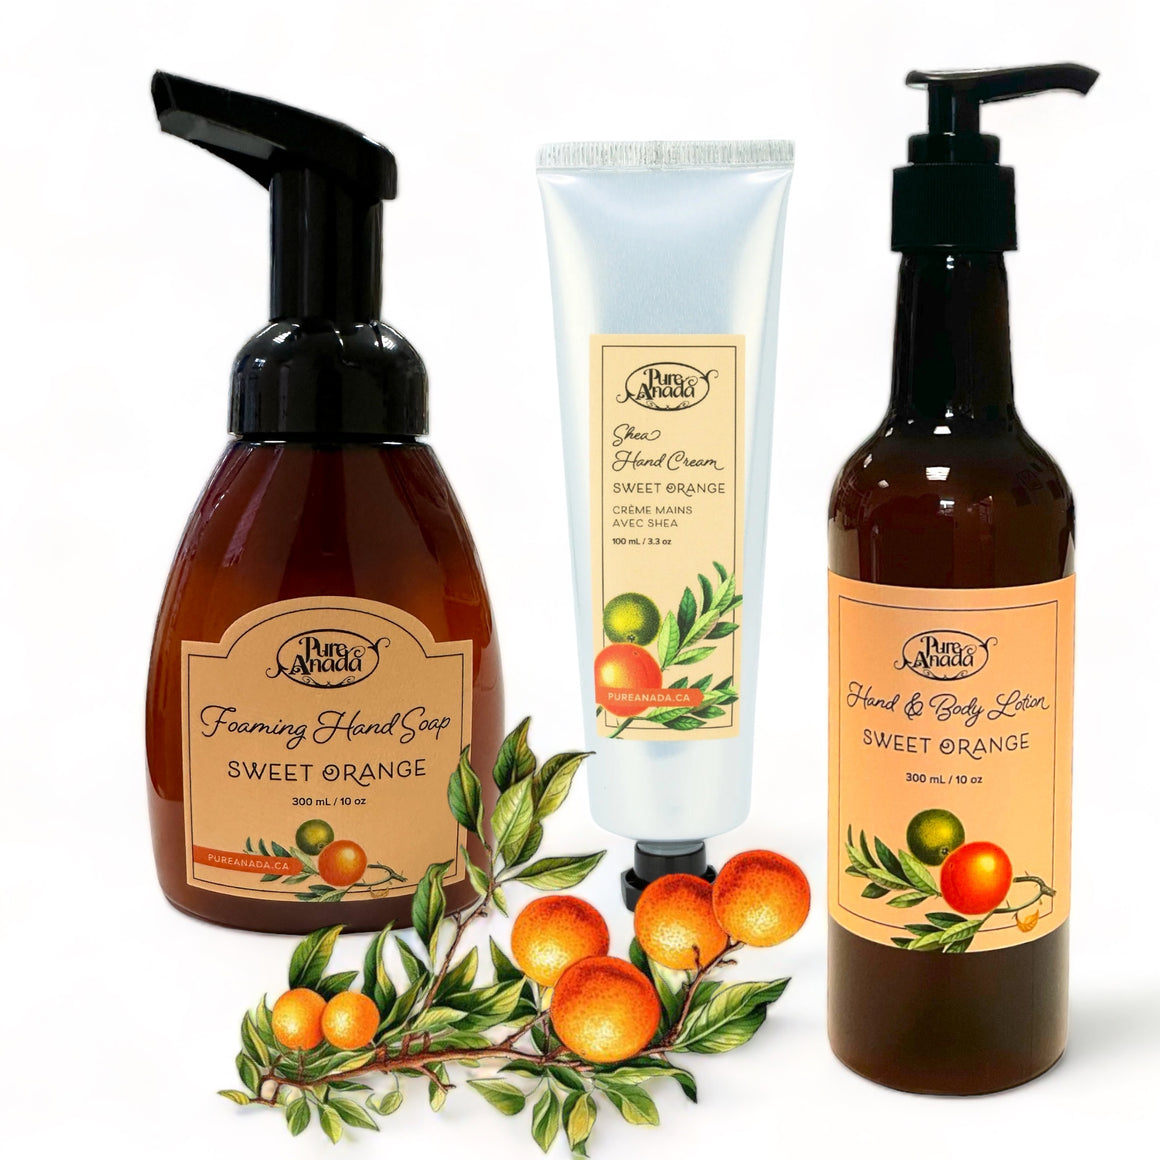 Sweet Orange Natural Hand & Body Lotion 300ml - Pure Anada CLEARANCE